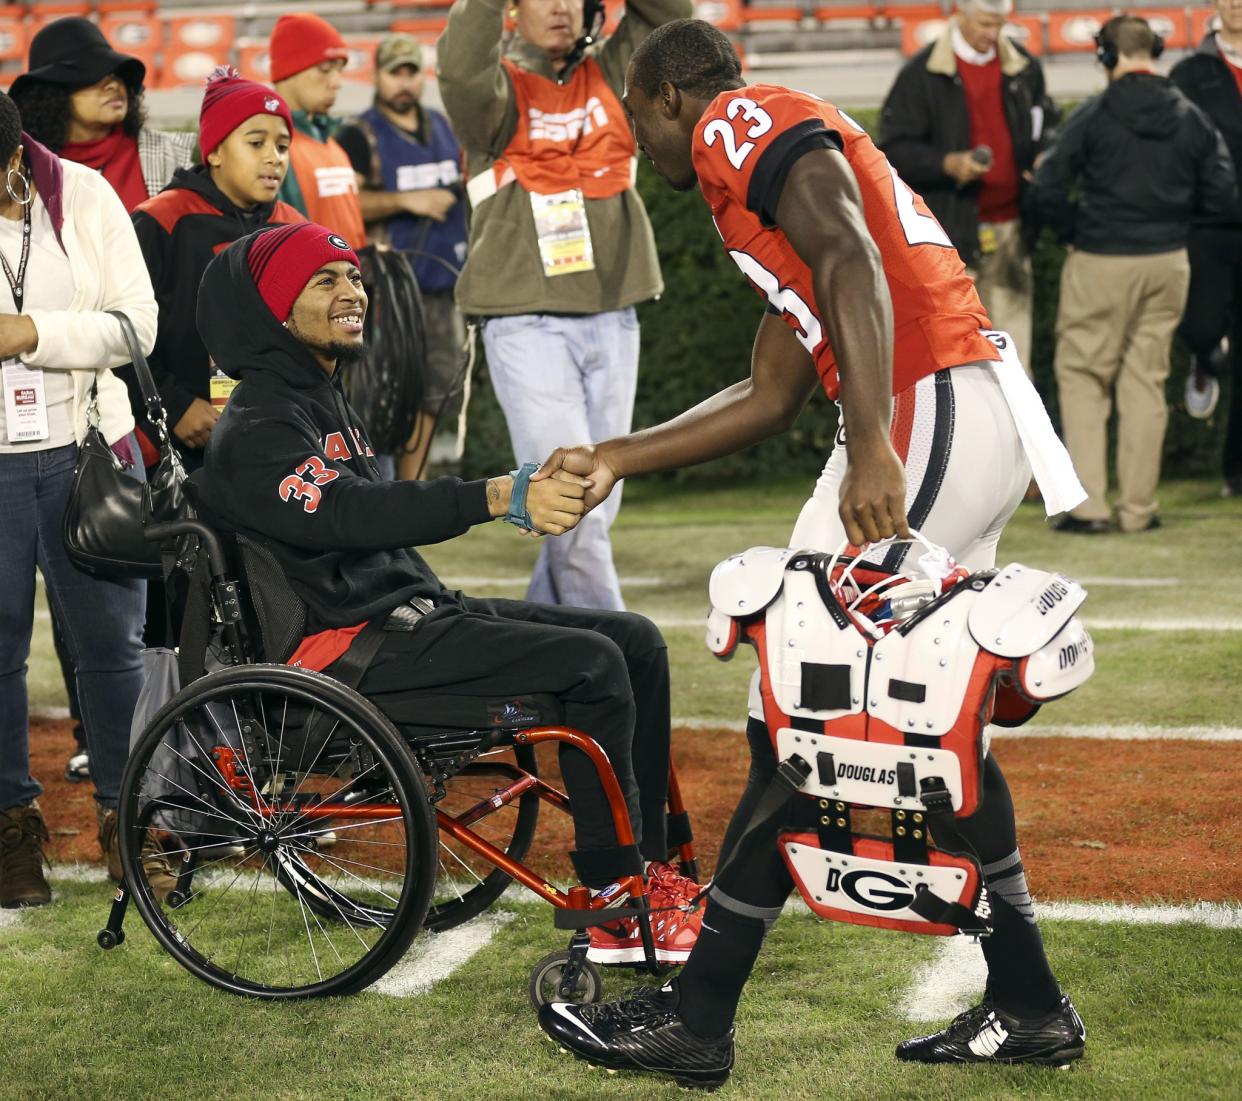 Southern University’s Devon Gales suffered a spinal injury during a game at Georgia. (AP Photo/John Bazemore)